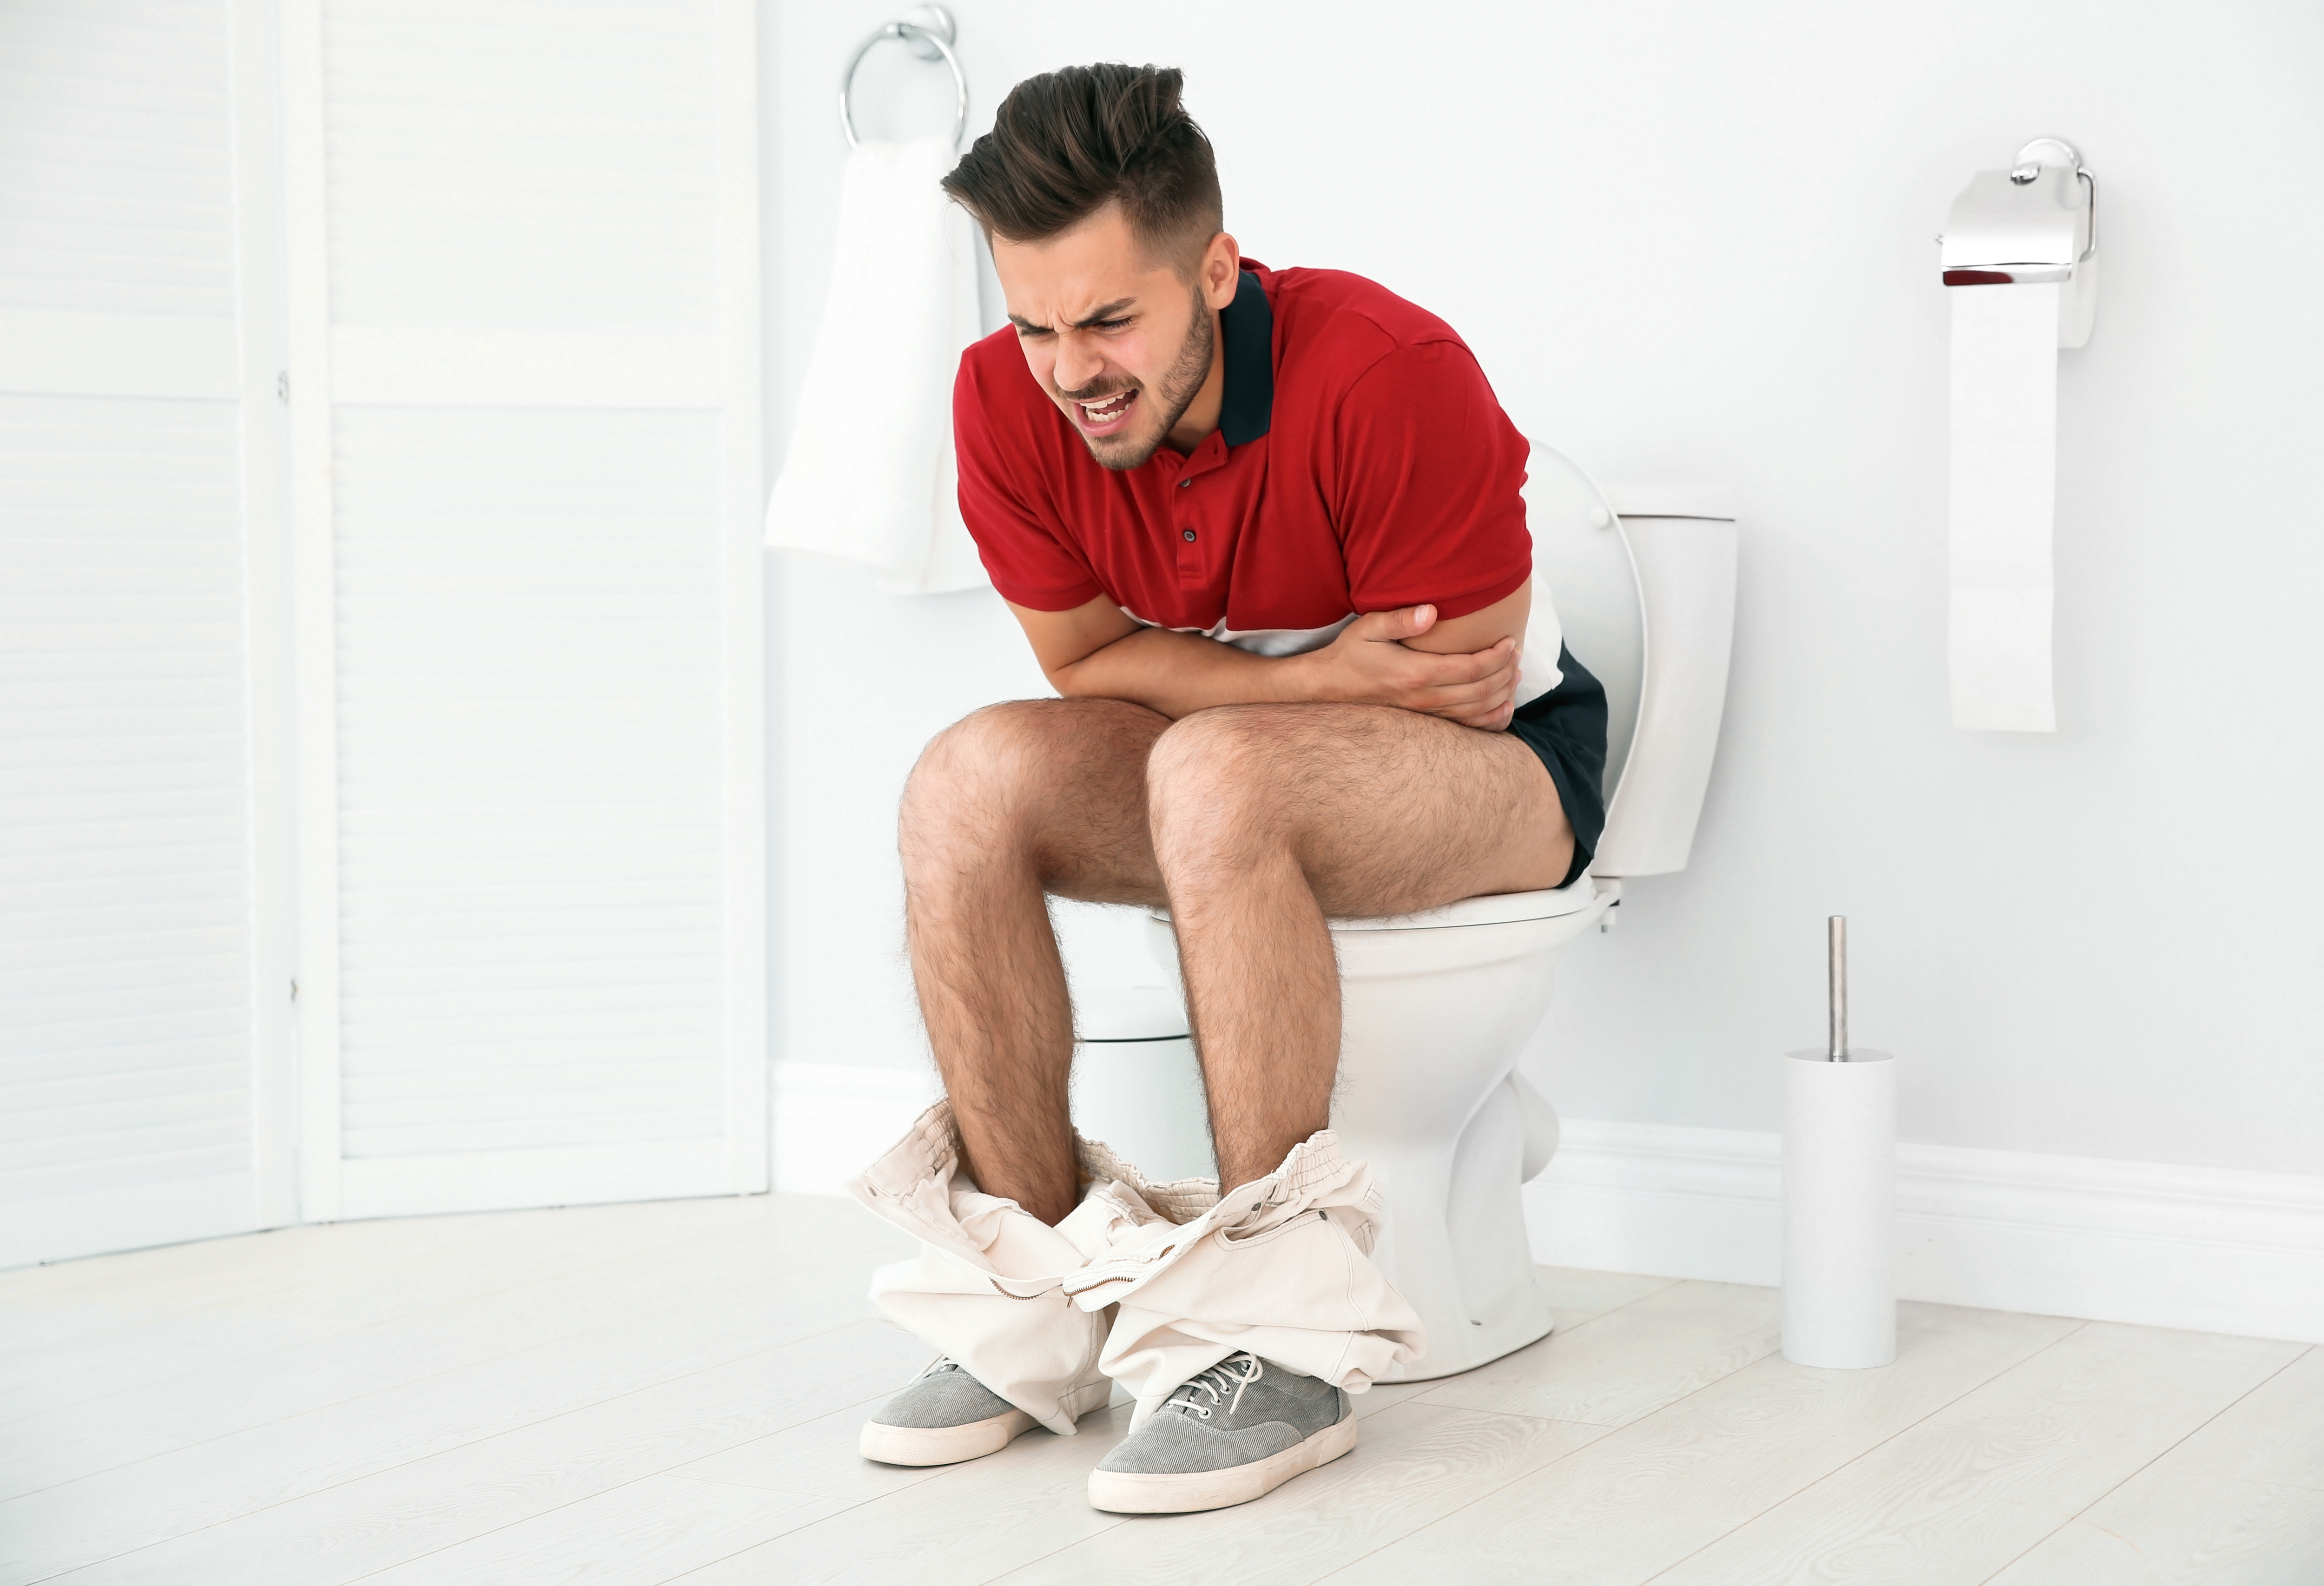 Got Burning Diarrhea? Here’s How to Stop It